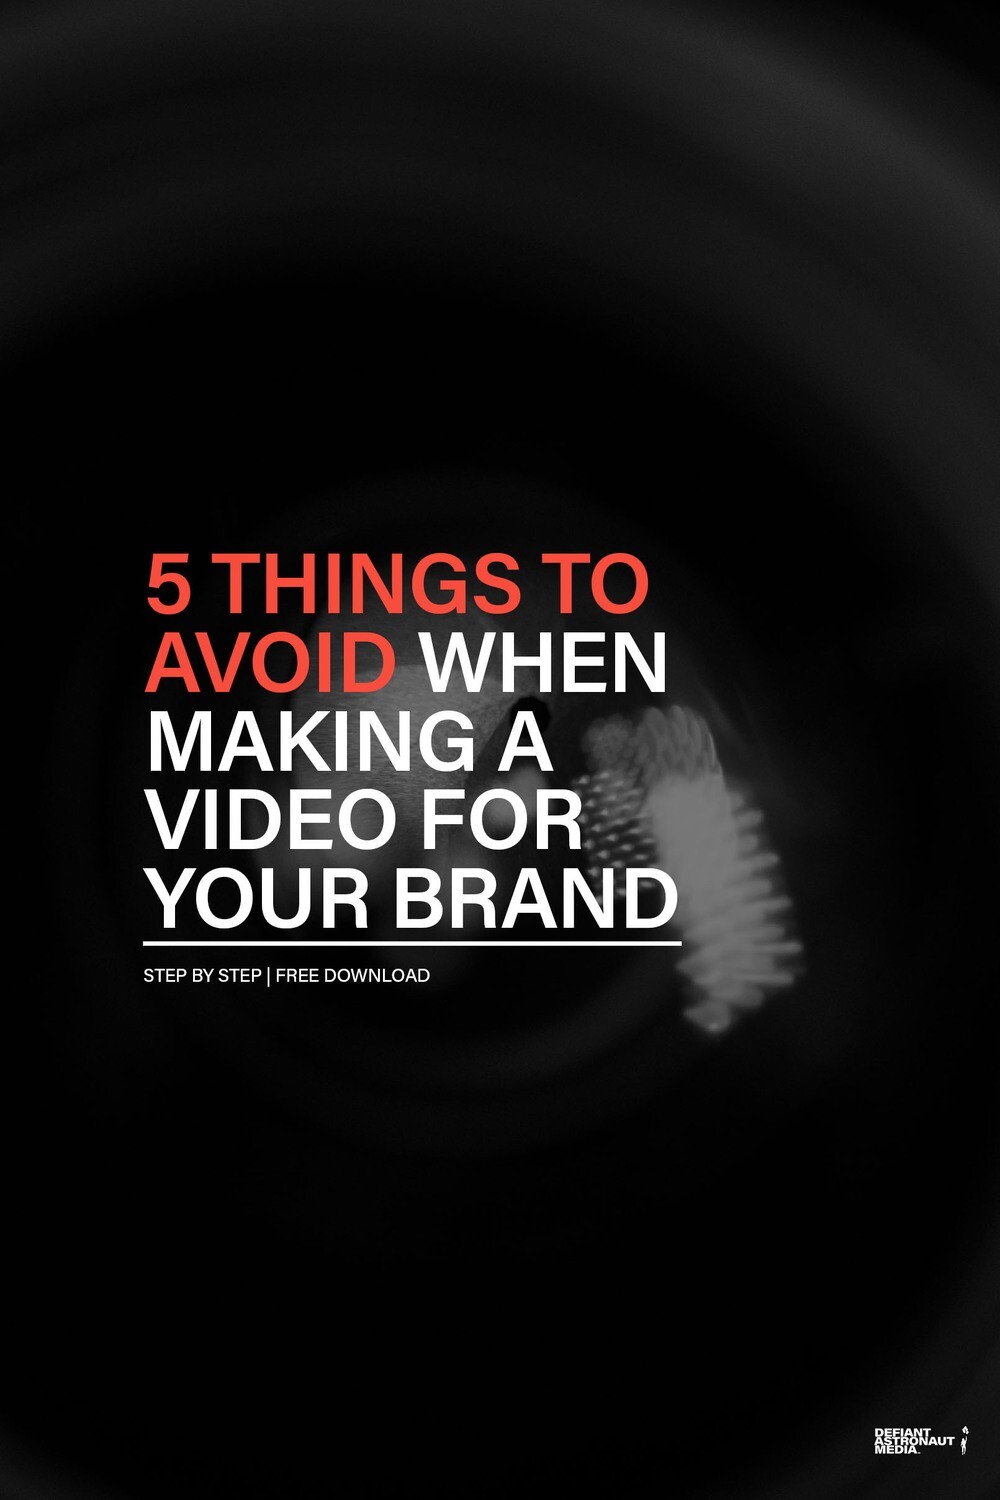 5 Things to Avoid When Making a Video for Your Brand